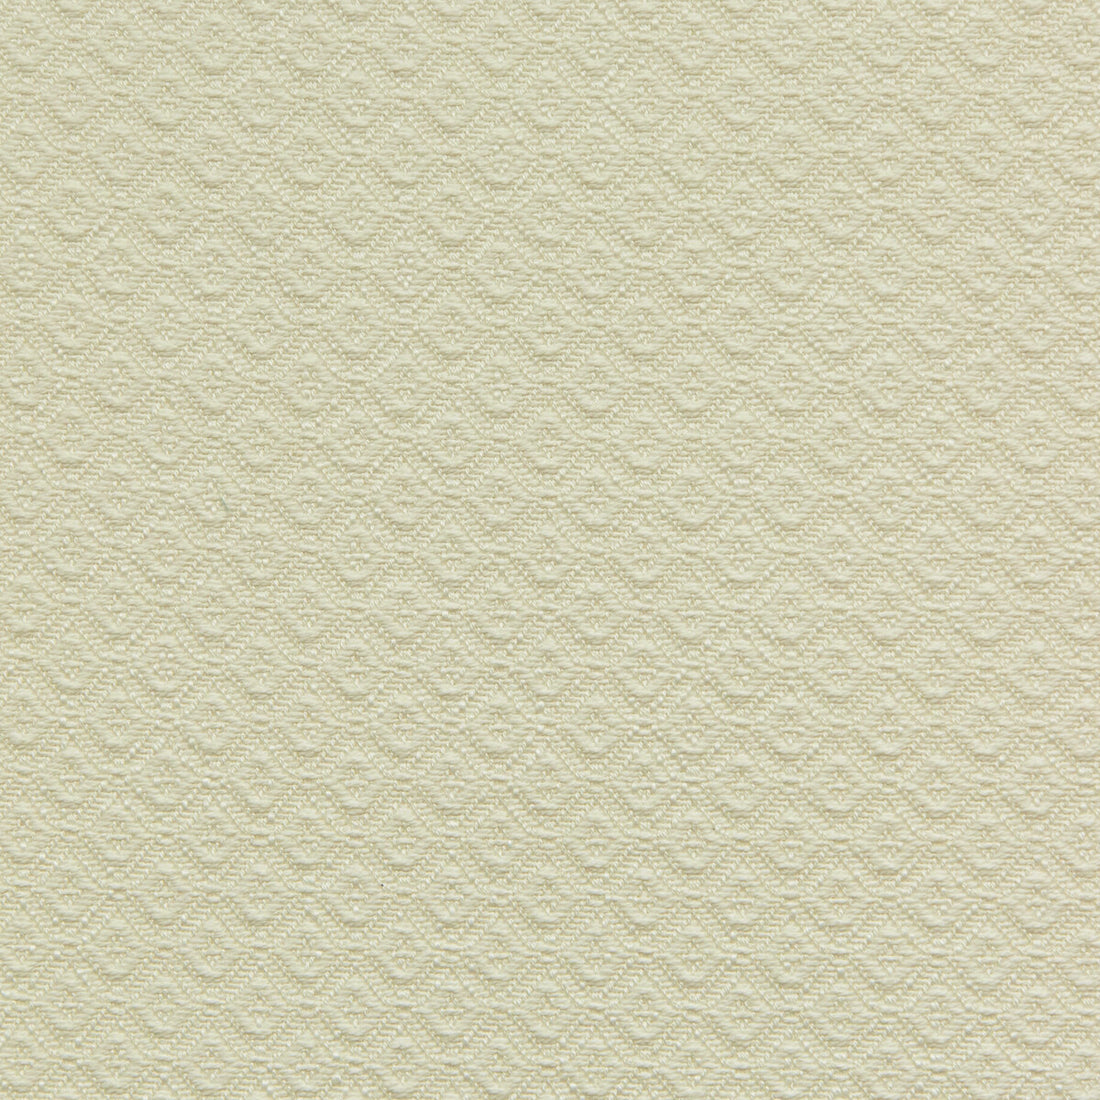 Seaford Weave fabric in ivory color - pattern 2020106.1.0 - by Lee Jofa in the Linford Weaves collection